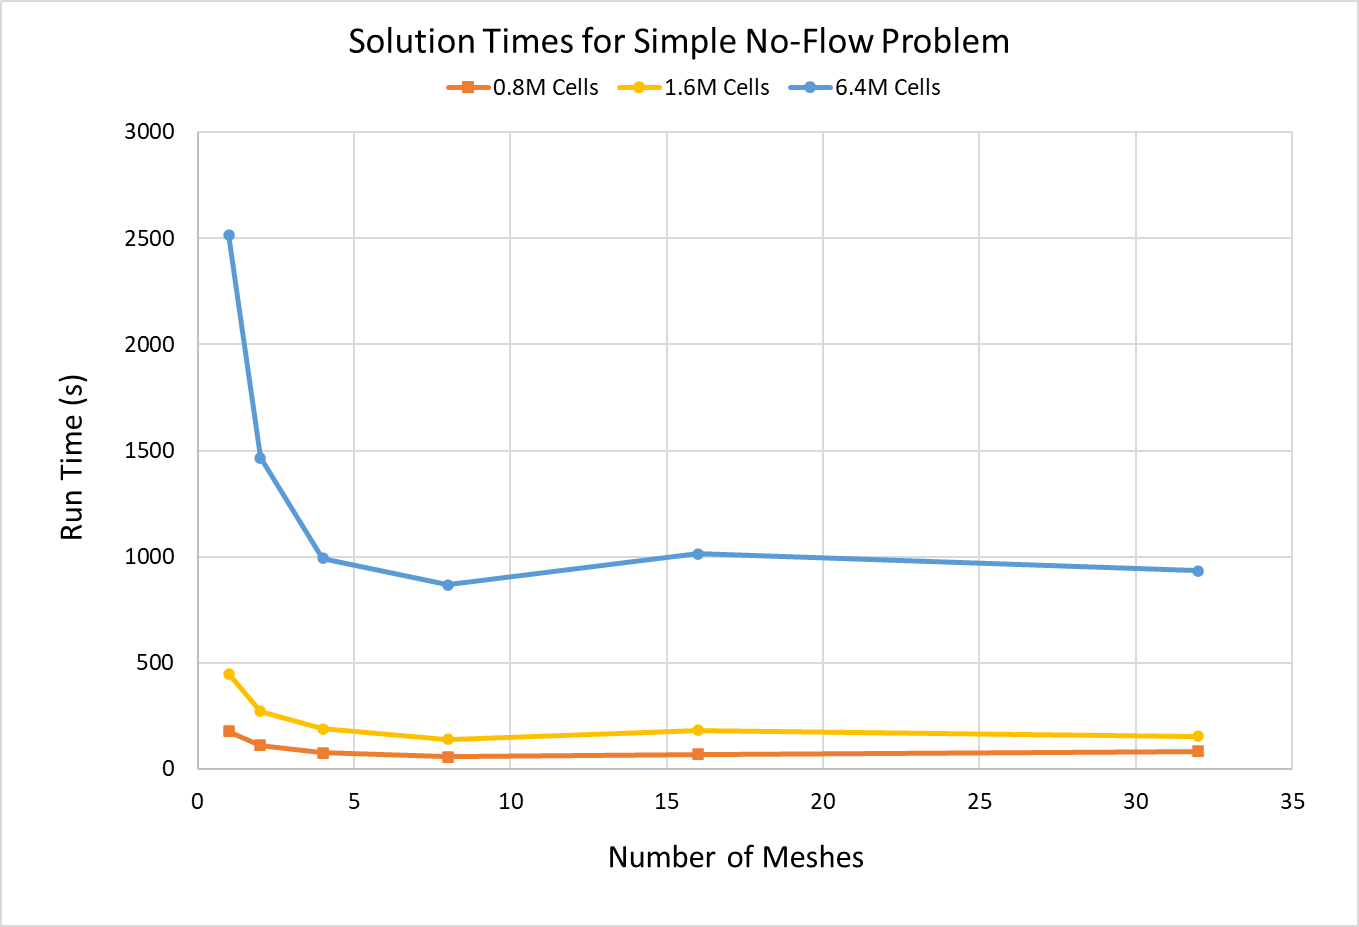 Solution times as a function of meshes.
